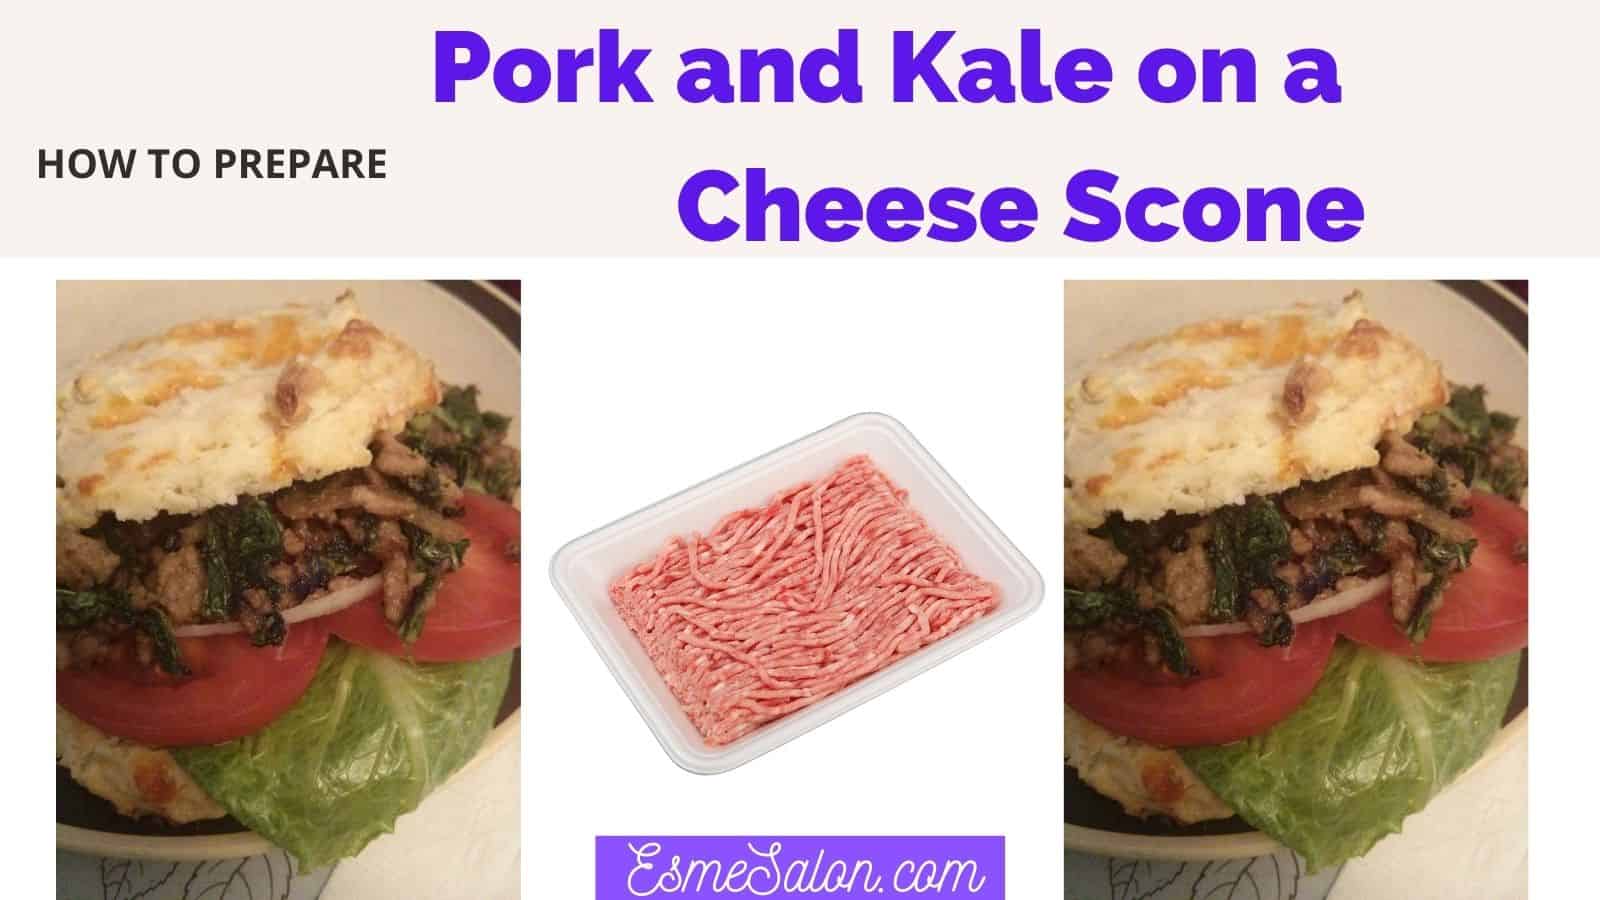 Ground Pork and Kale on a Cheese Scone with lettuce and tomato slices